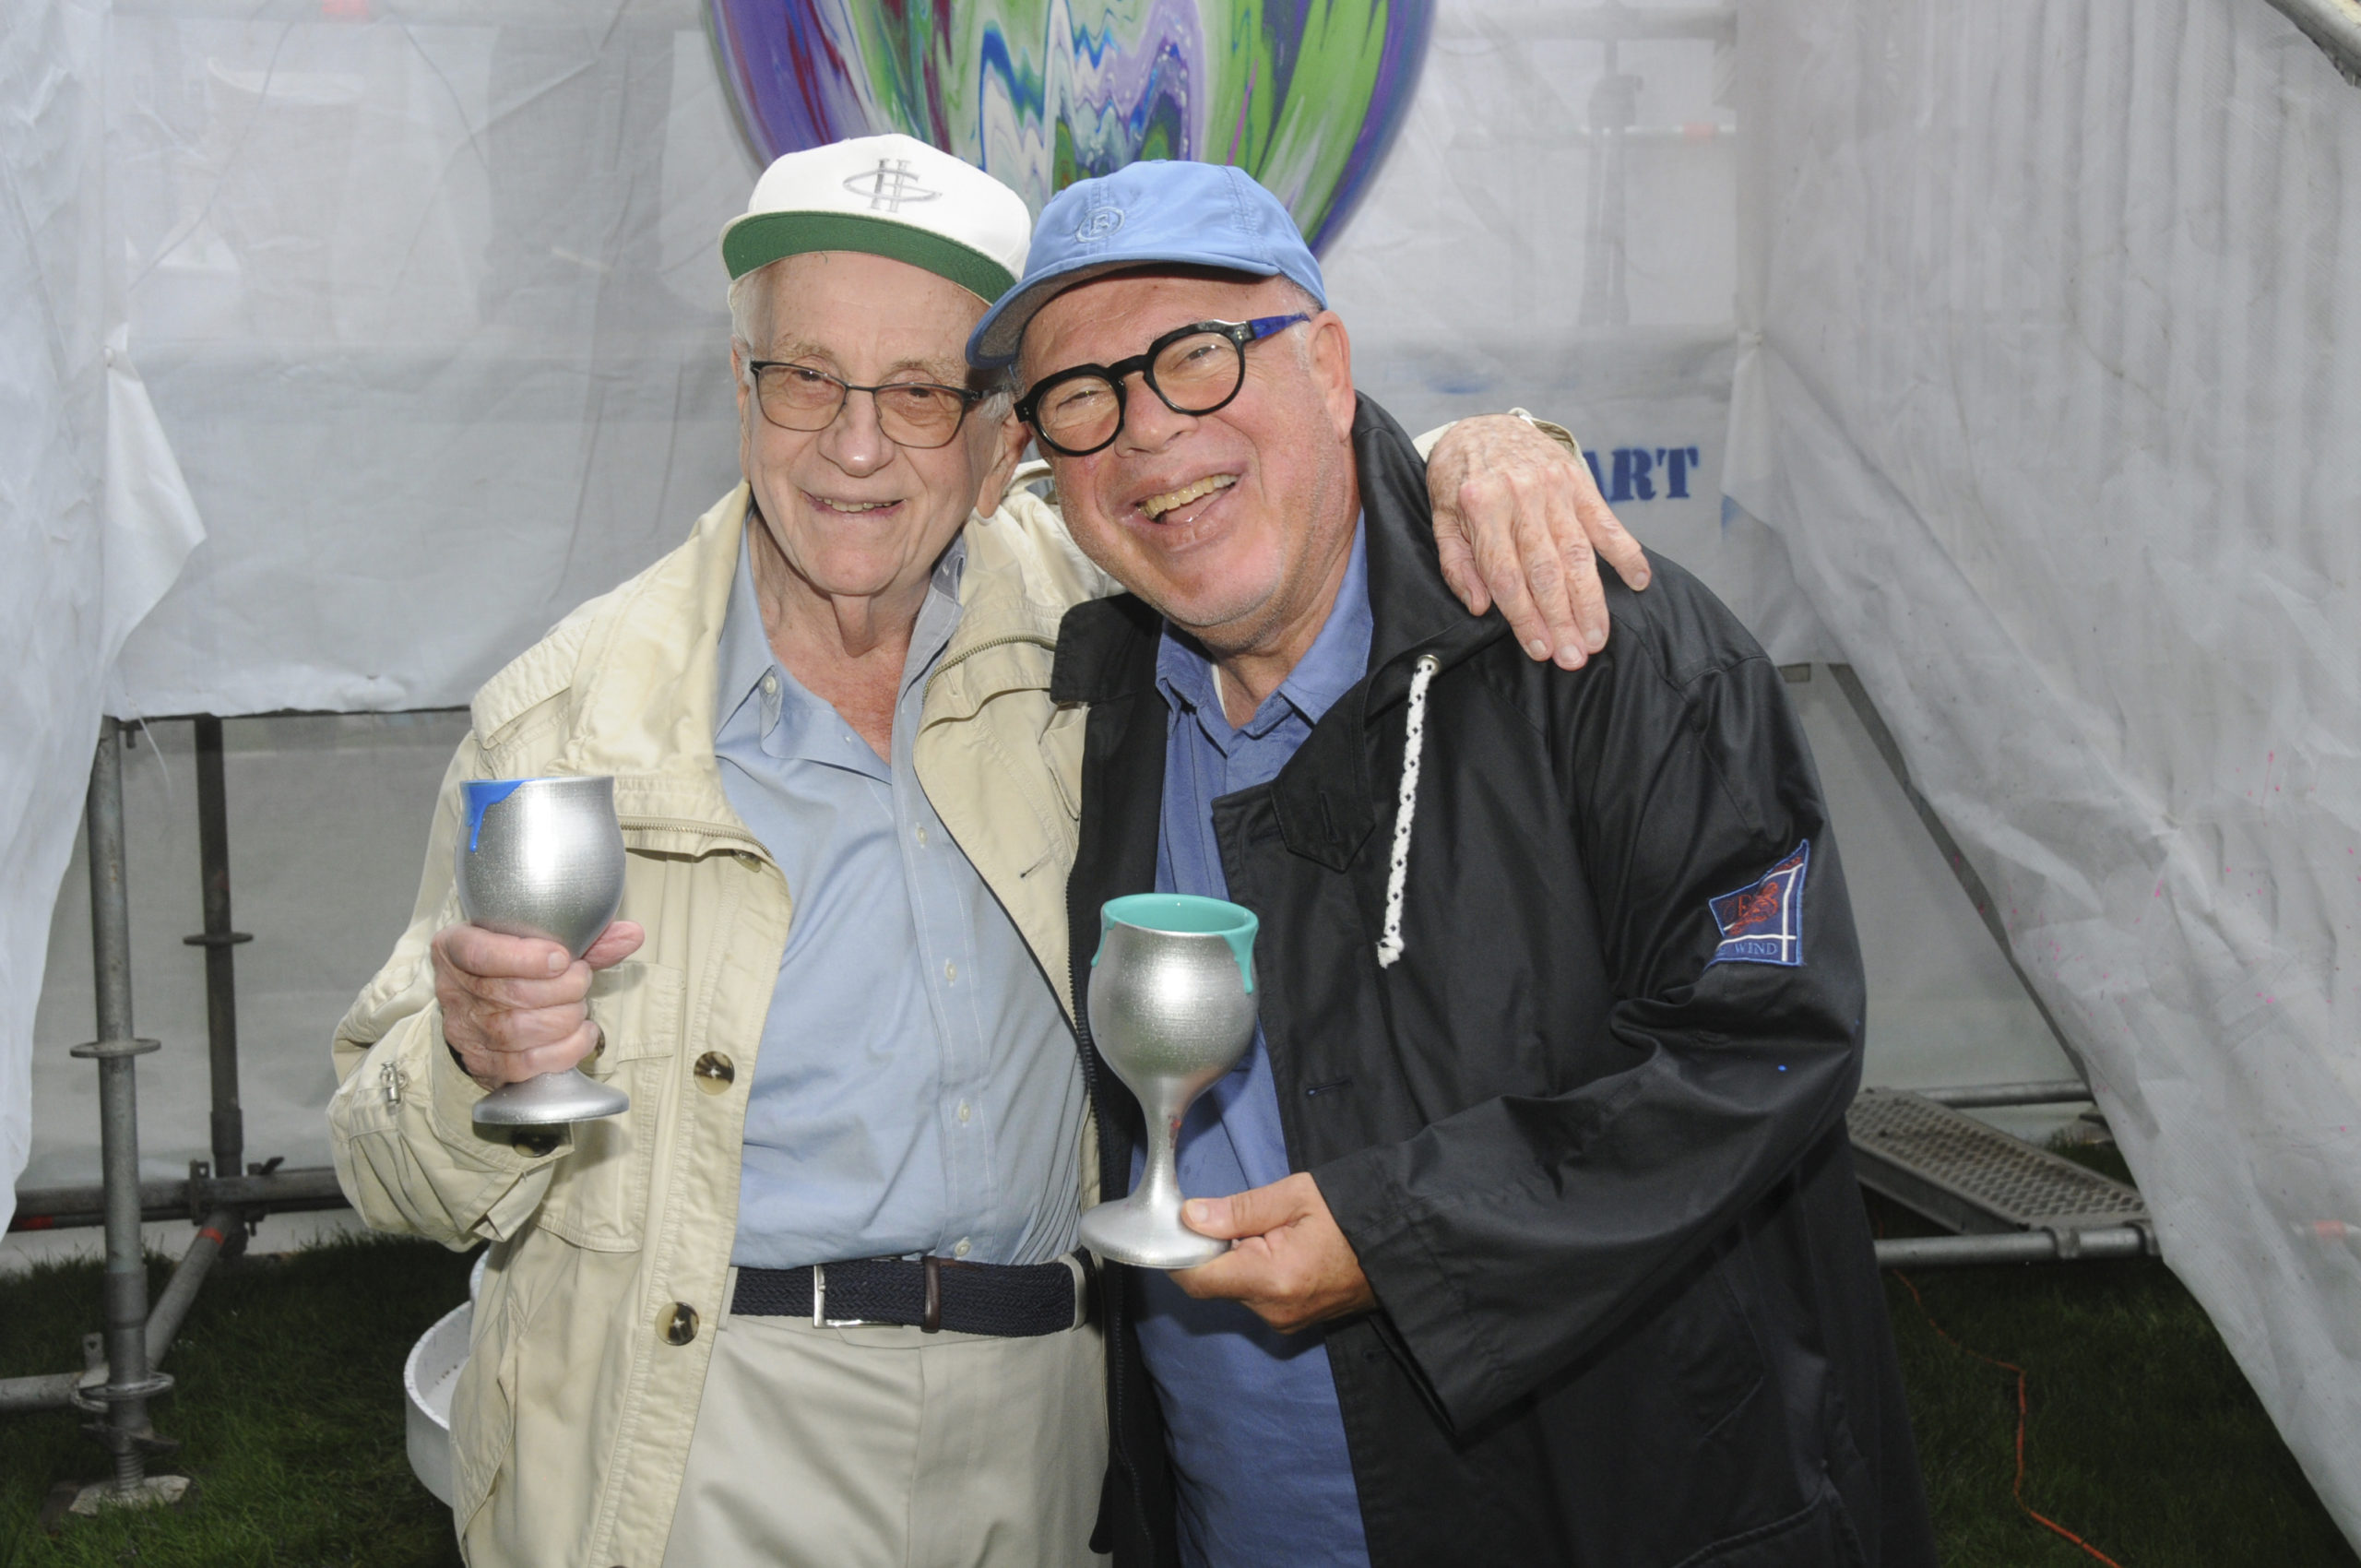 Bernard Goldberg and Norman Stark, two of the founders of the Chabad of the Hamptons, at the 11th Annual Benefit, called “Overflowing Blessings” on August 8. Guests had a chance to brush up on their art skills, as they took turns pouring cups of paint over the eight foot tall Kiddush Cup by Yitzchock Moully, the Pop Art Rabbi.     RICHARD LEWIN